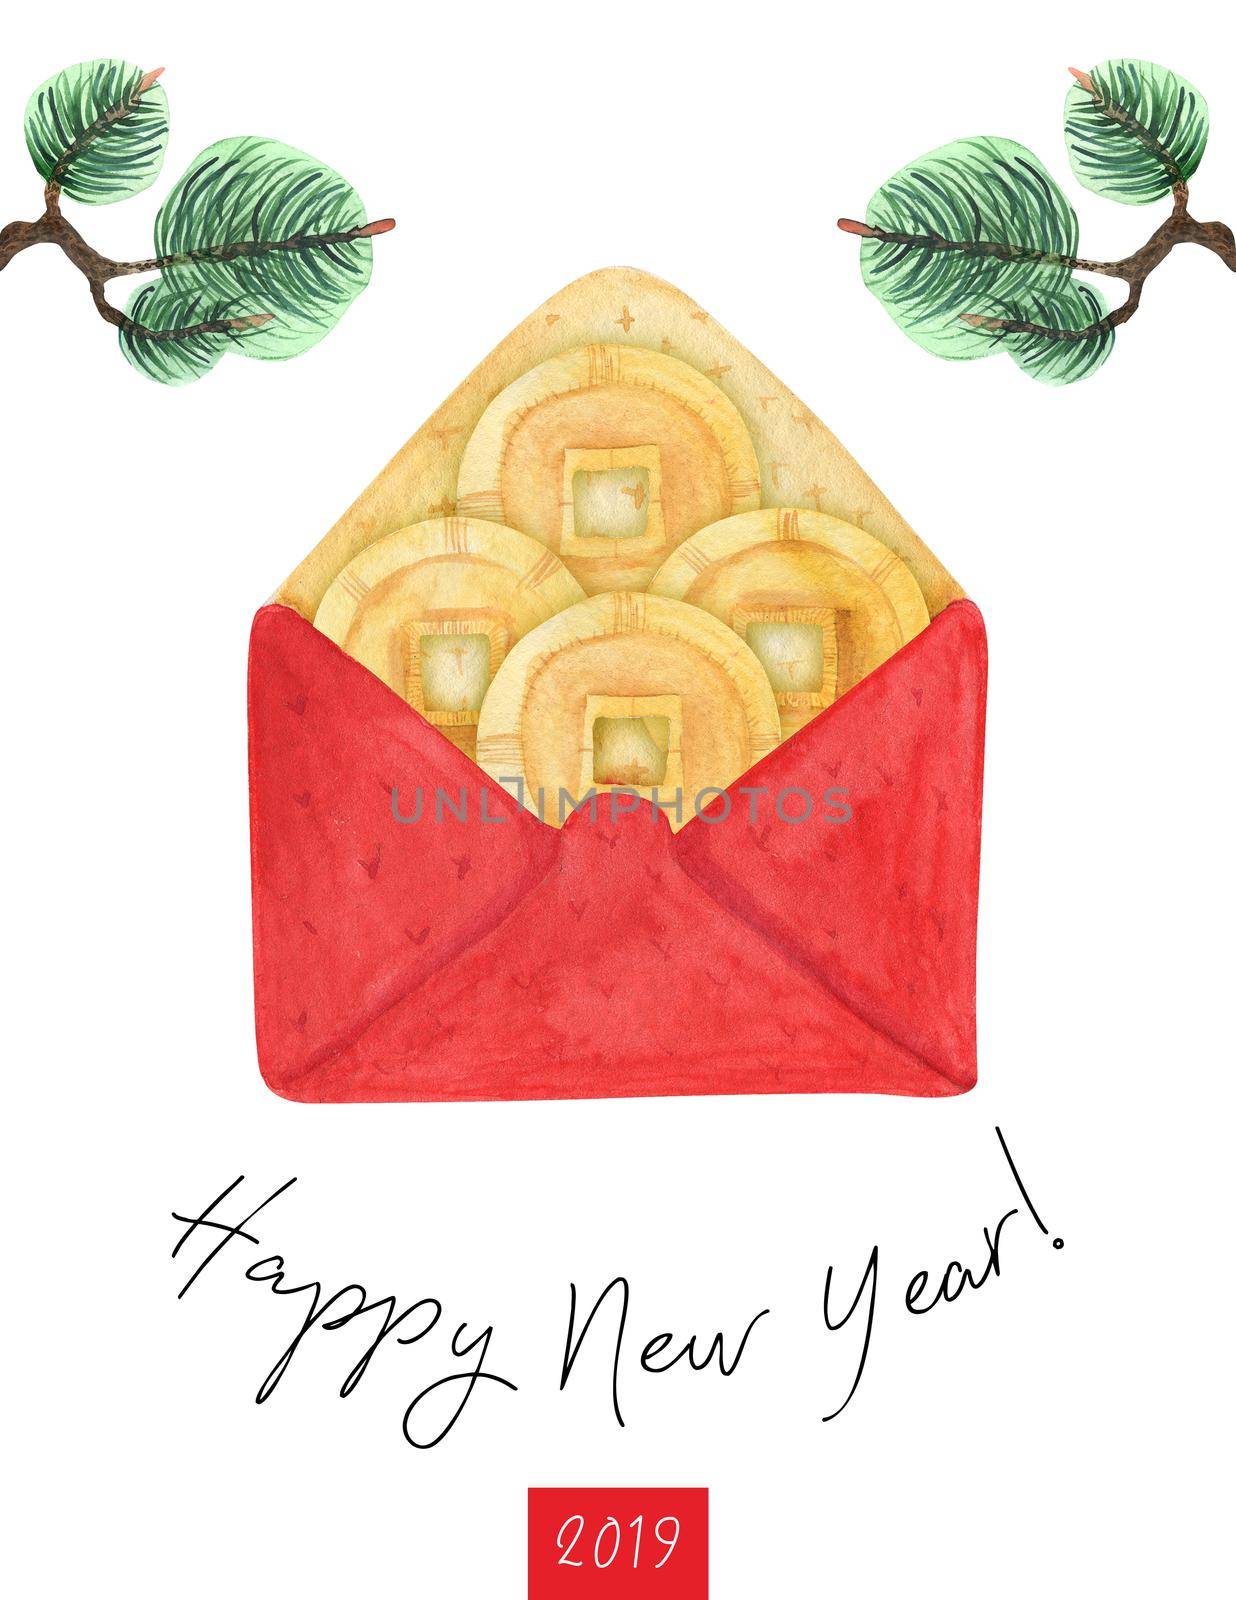 Happy New Year watercolor postcard with lucky money in red envelope and pine branches